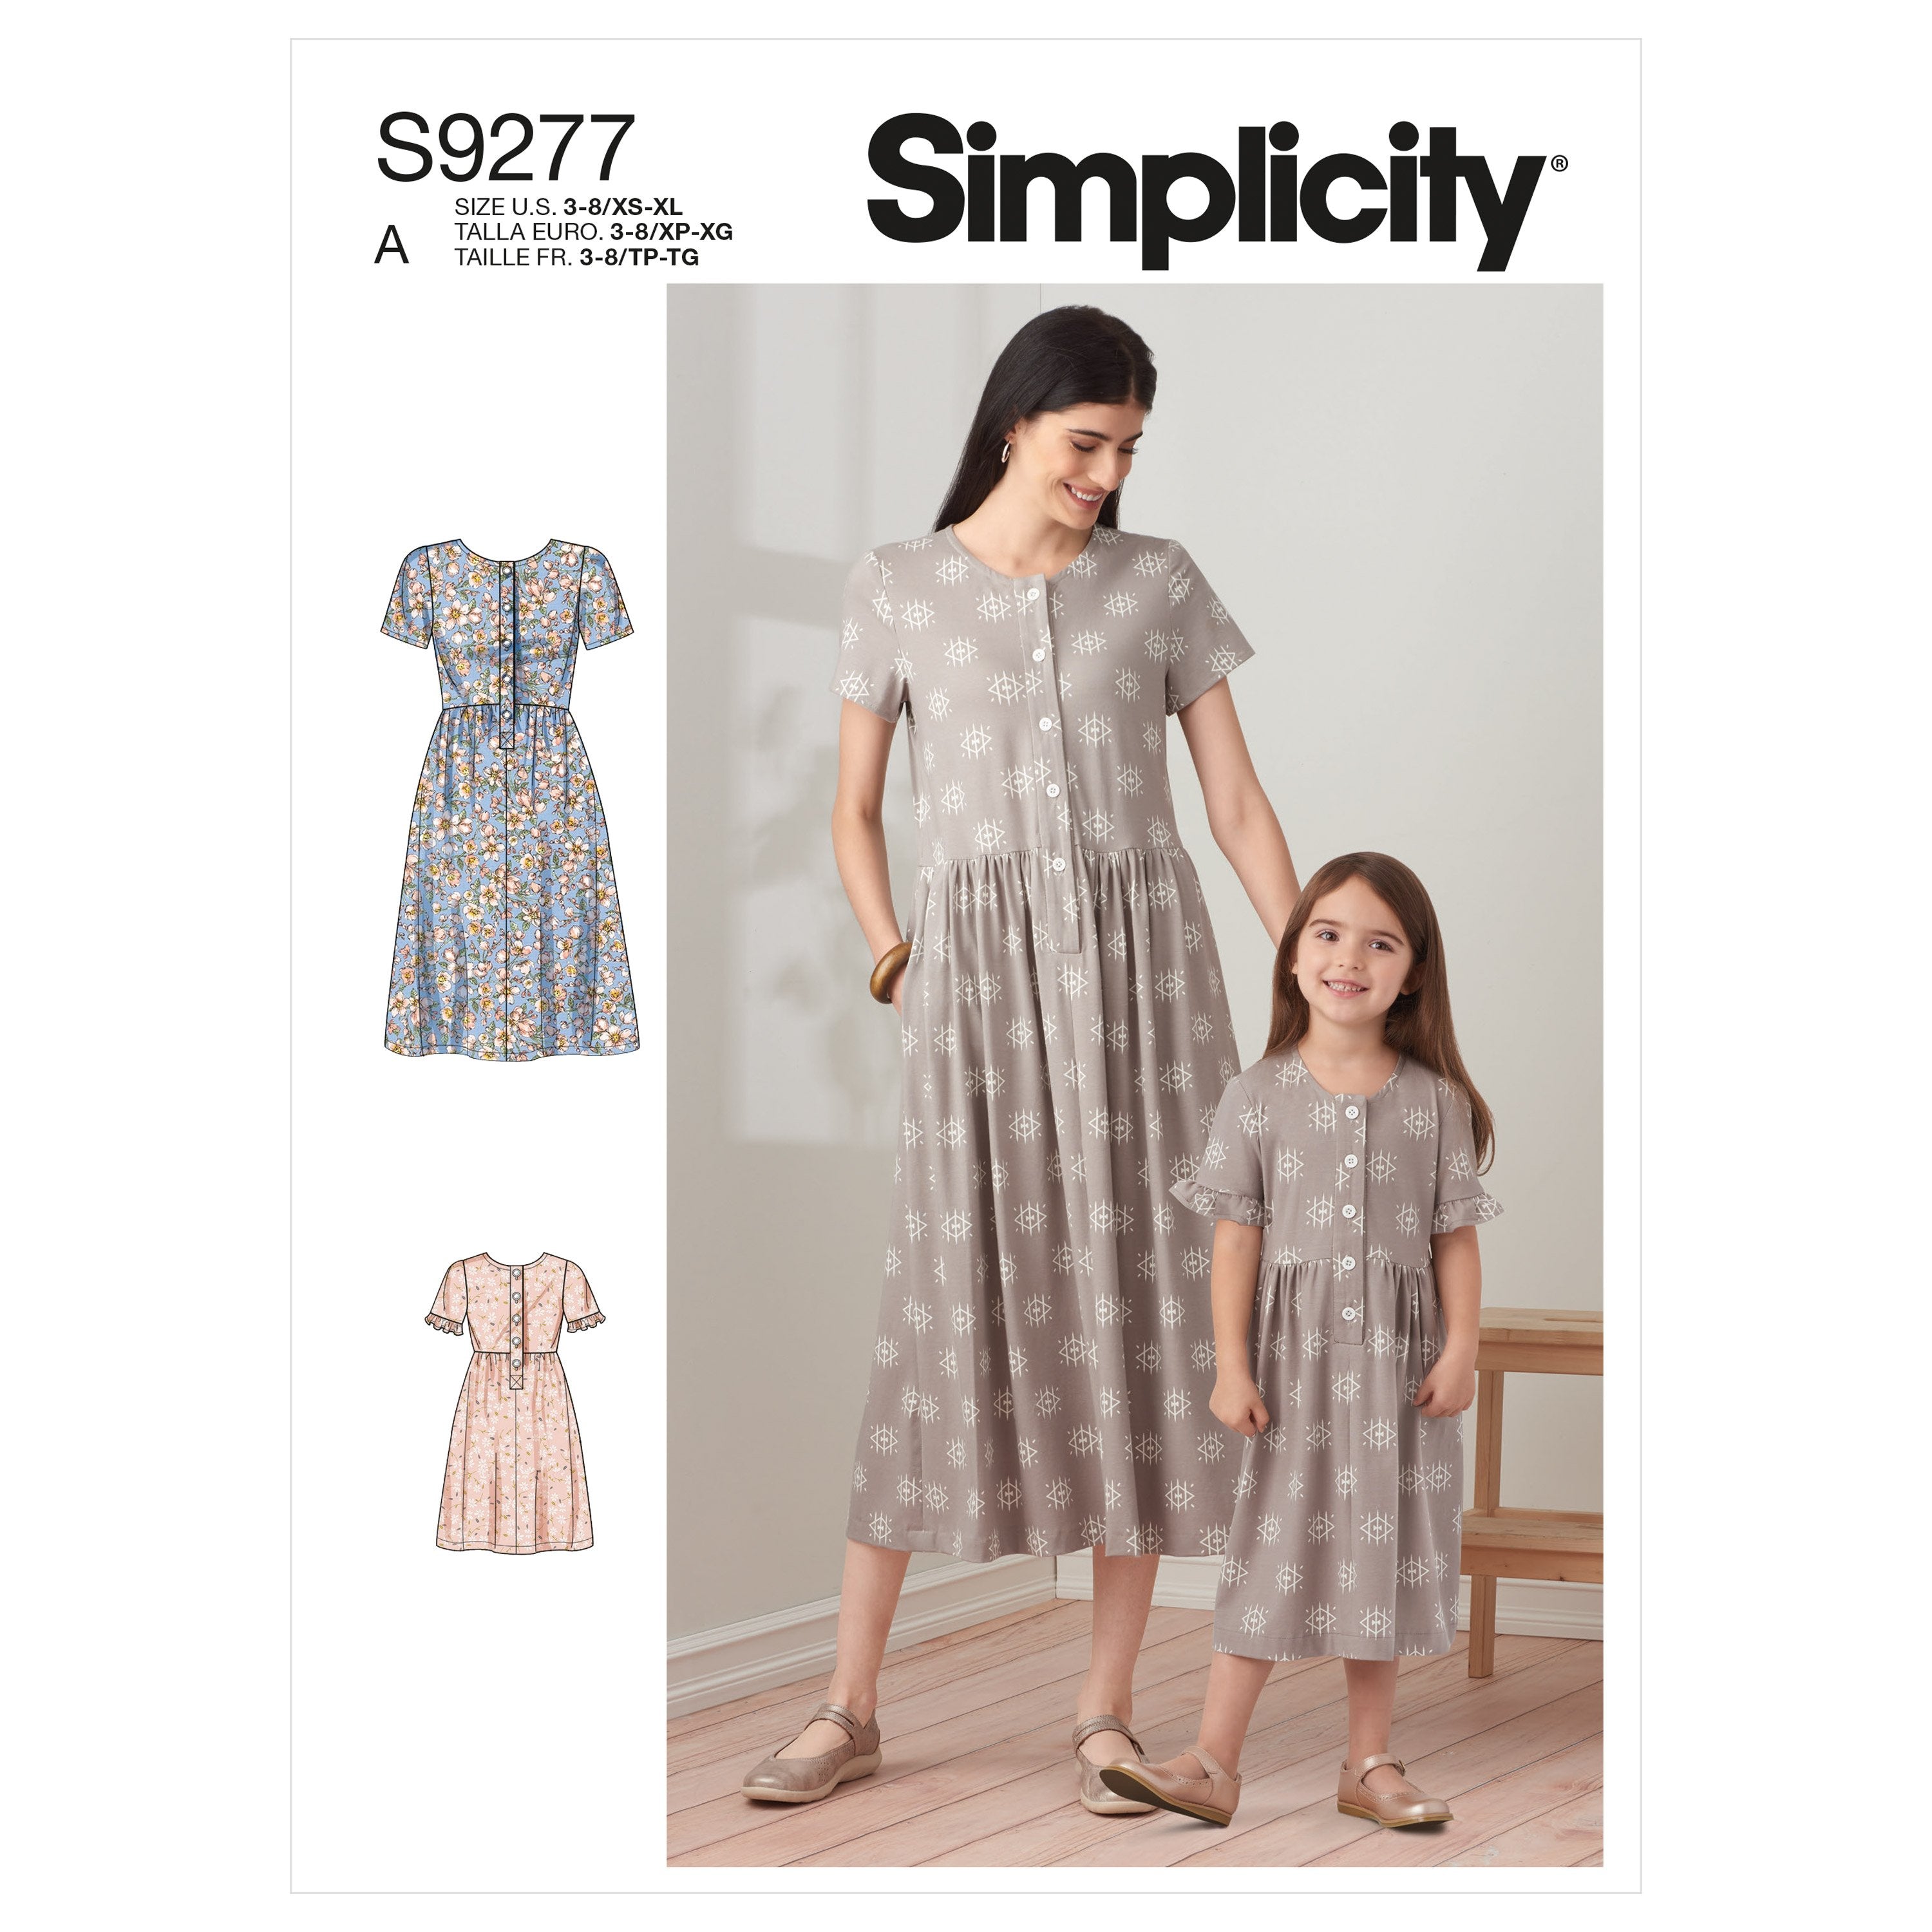 Simplicity Sewing Pattern 9277 Misses and Children's Dresses from Jaycotts Sewing Supplies